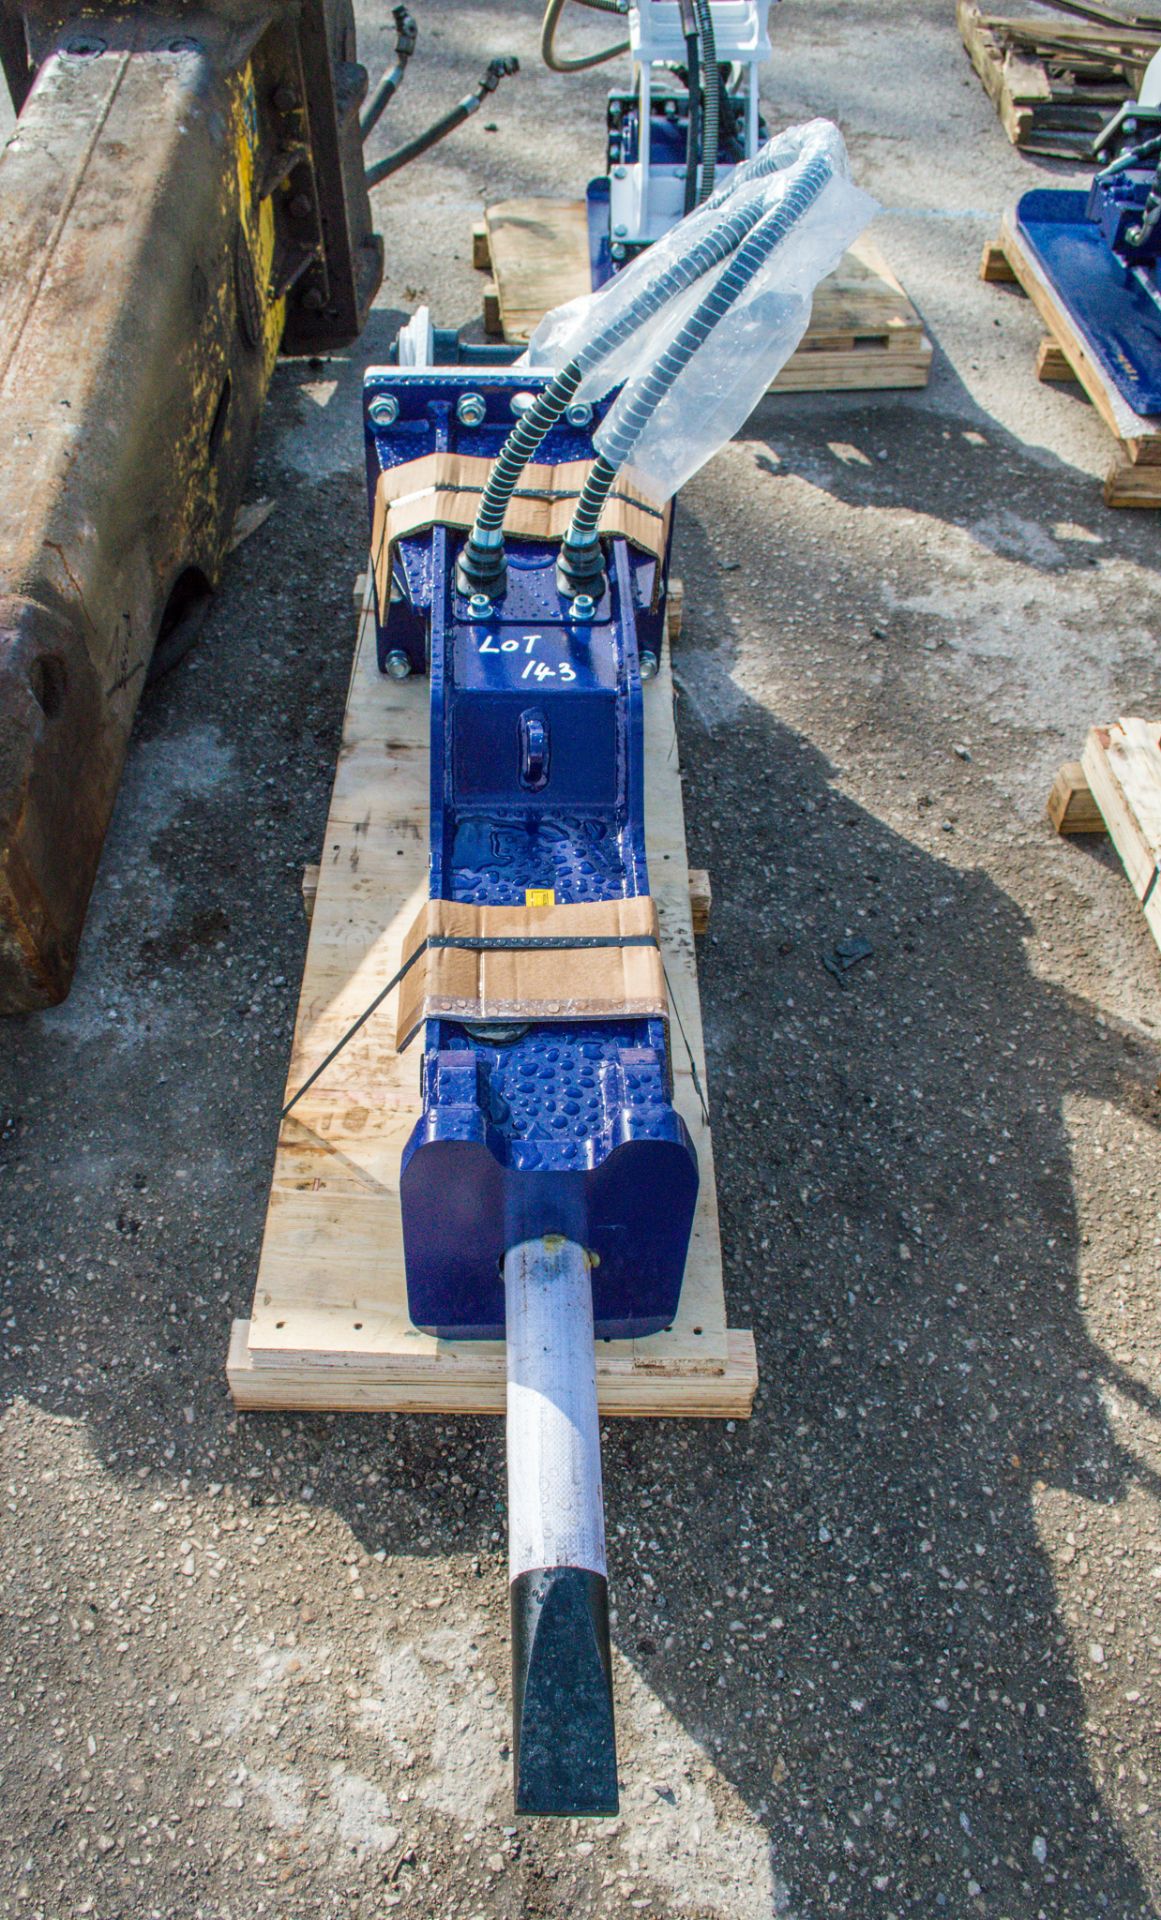 Hirox HD-X20 hydraulic breaker to suit 5-8 tonne excavator ** New and unused ** ** Gassed ** - Image 3 of 3